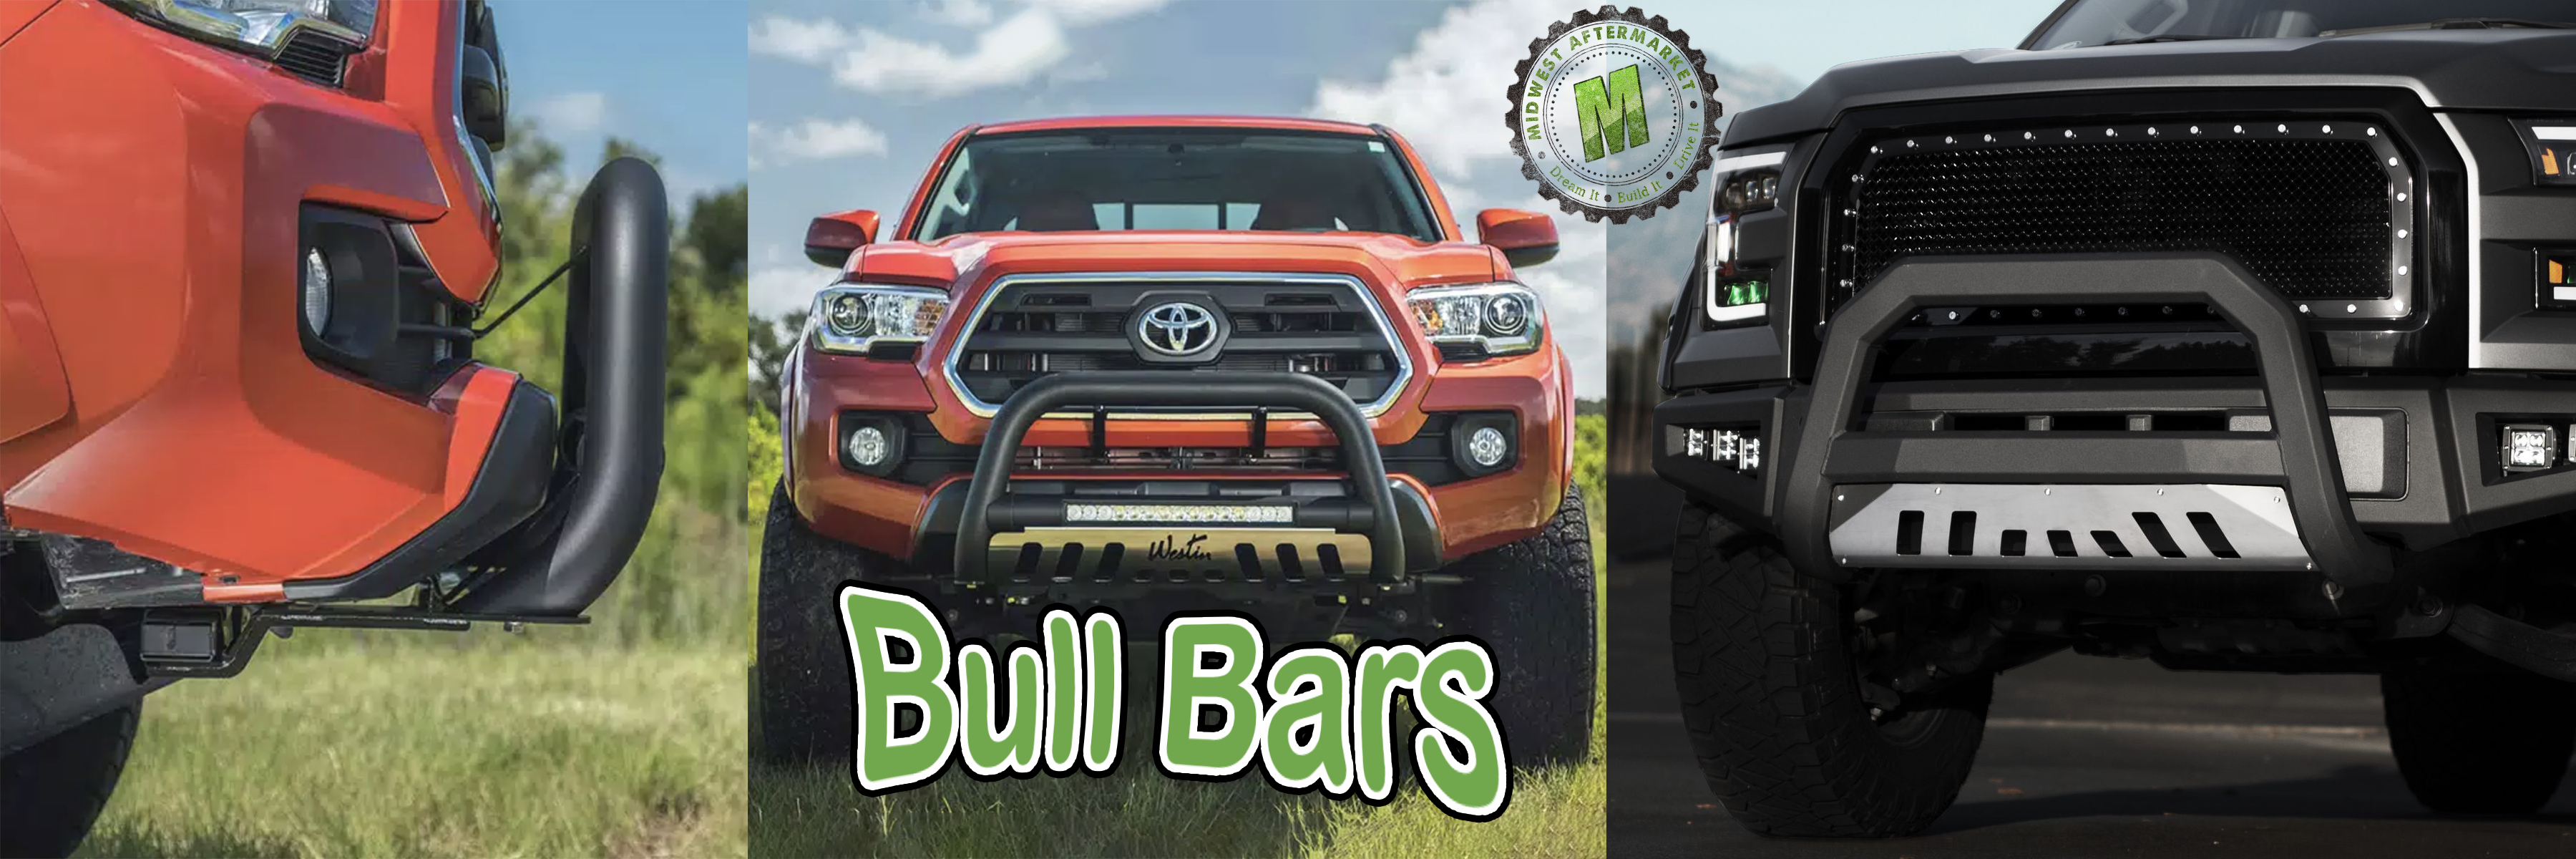 Guide to All Things Bull Bar